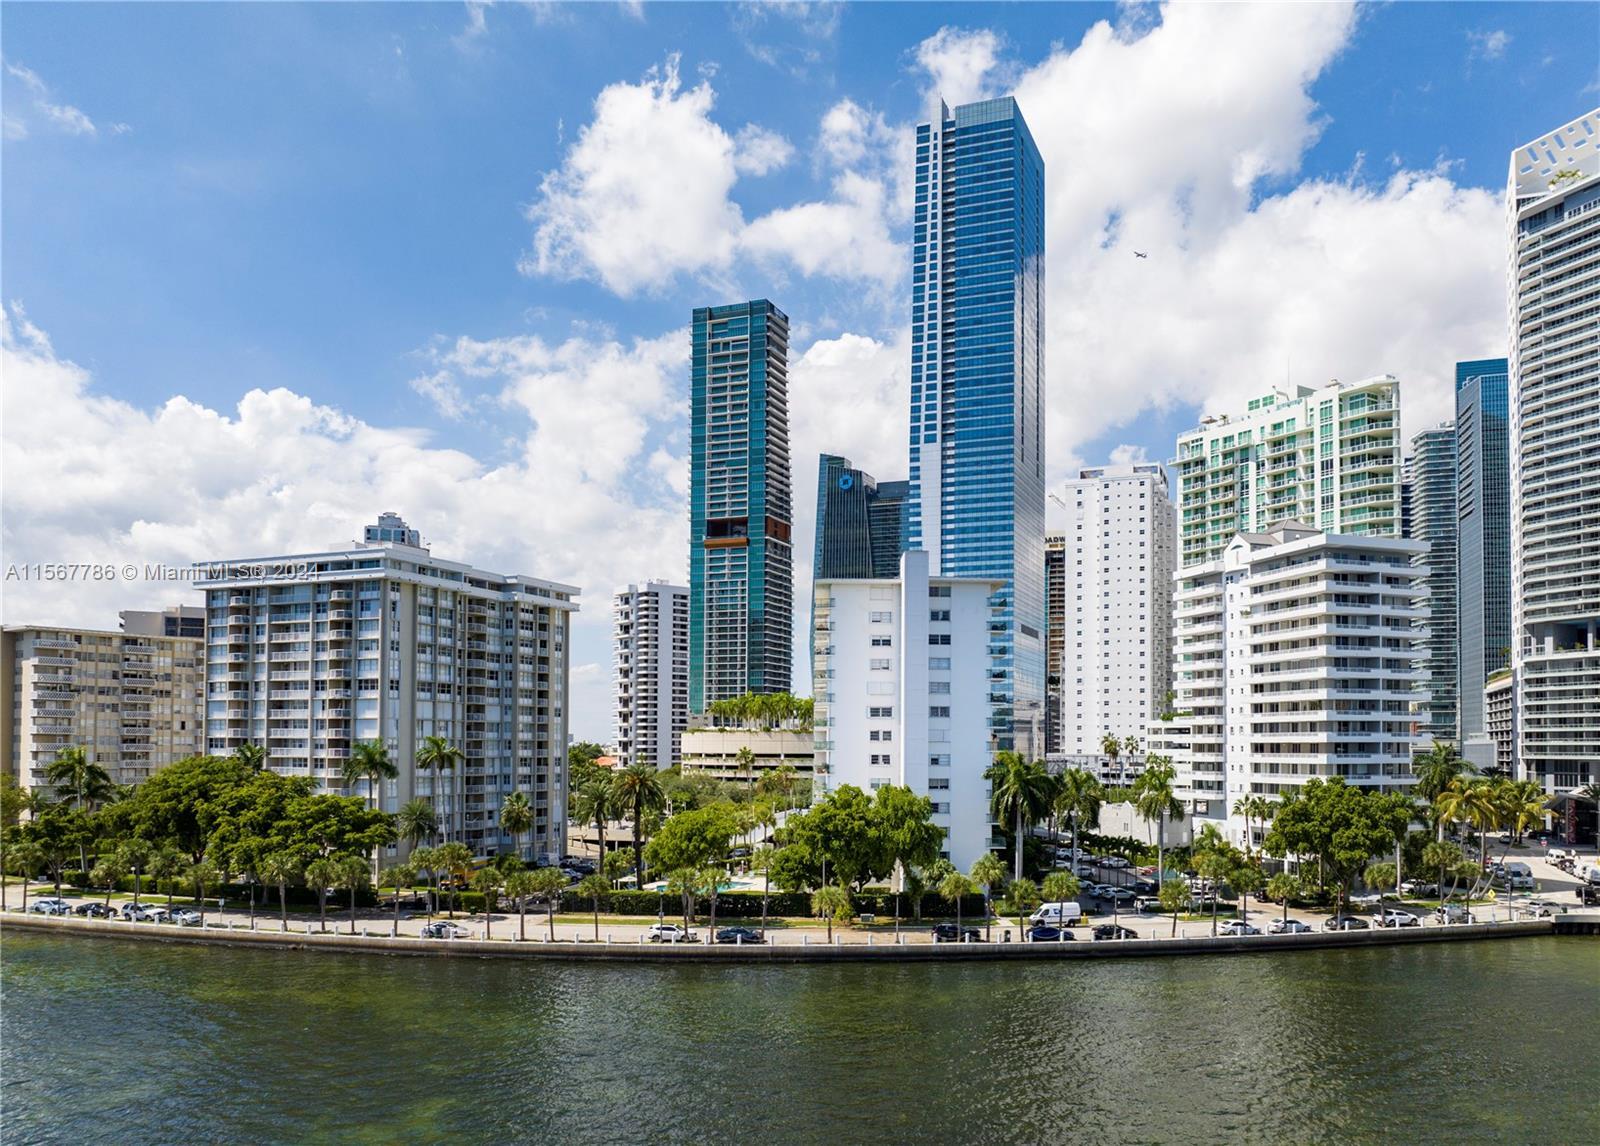 Prime location in the bustling finance and business hub of Brickell, this bayside gem offers a spaci